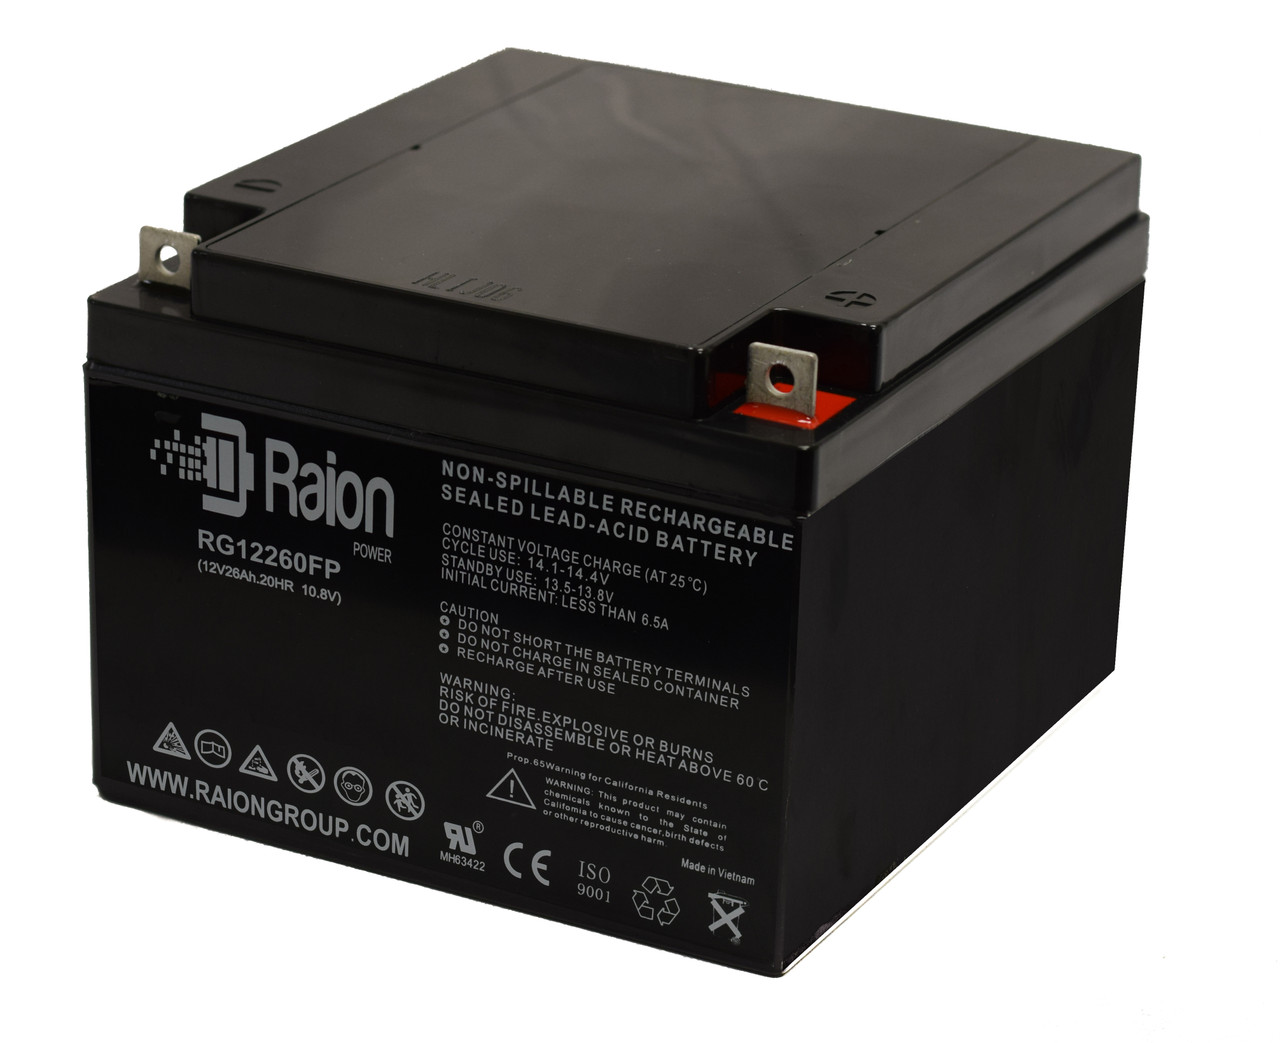 Raion Power Replacement 12V 26Ah Battery for Weiboer GB12-26 - 1 Pack